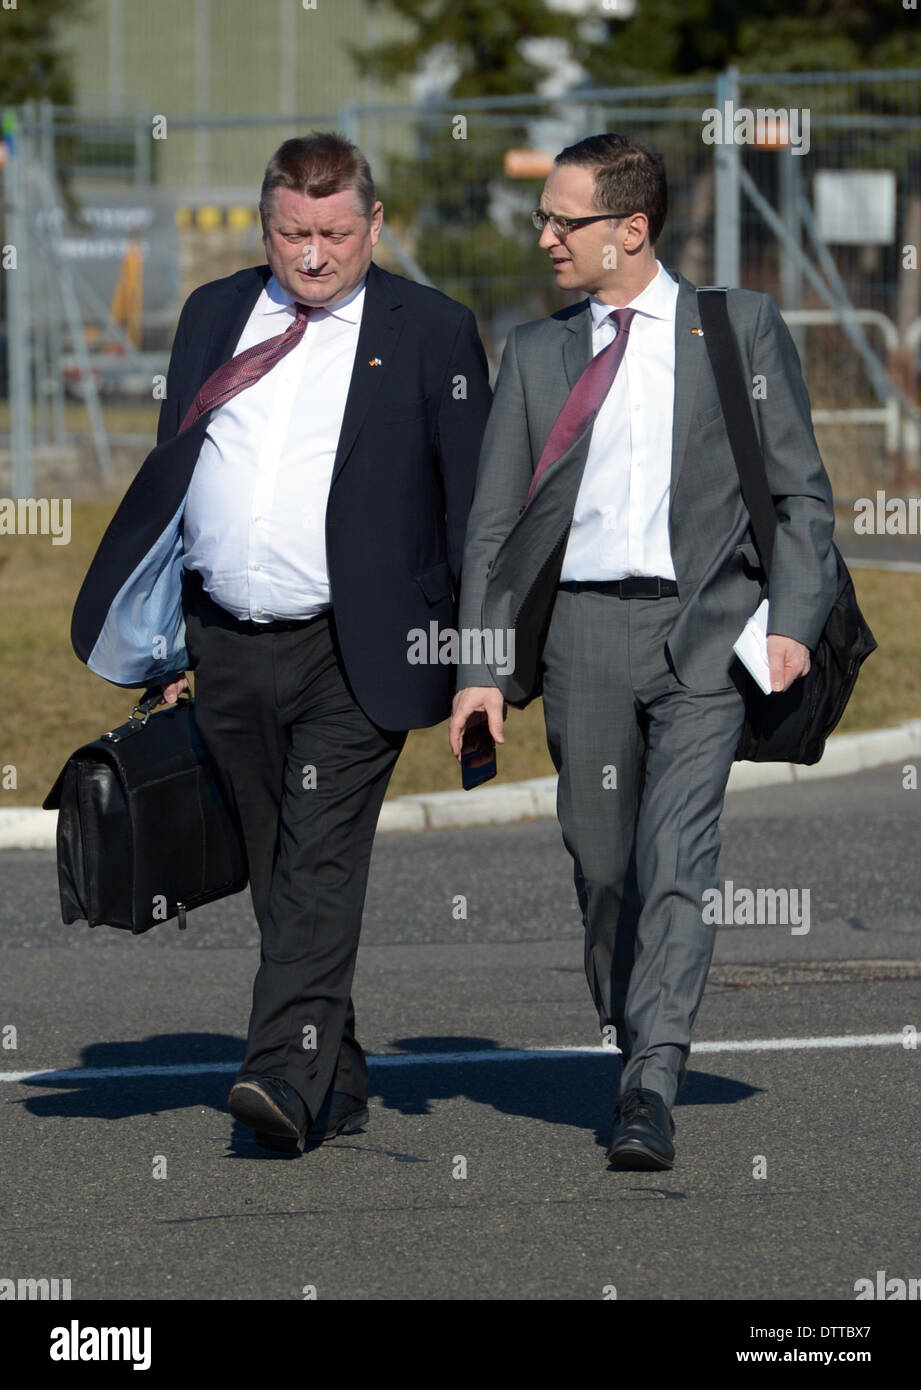 Berlin, Germany. 24th Feb, 2014. German Health Minister Hermann Groehe (CDU) and German Minister of Justice Heiko Maas (SPD) walk to a government aircraft at Tegel airport in Berlin, Germany, 24 February 2014. On the same day German Chancellor Merkel (CDU) travels to Israel with almost all the members of her cabinet for a two day official visit. Photo: Rainer Jensen/dpa/Alamy Live News Stock Photo